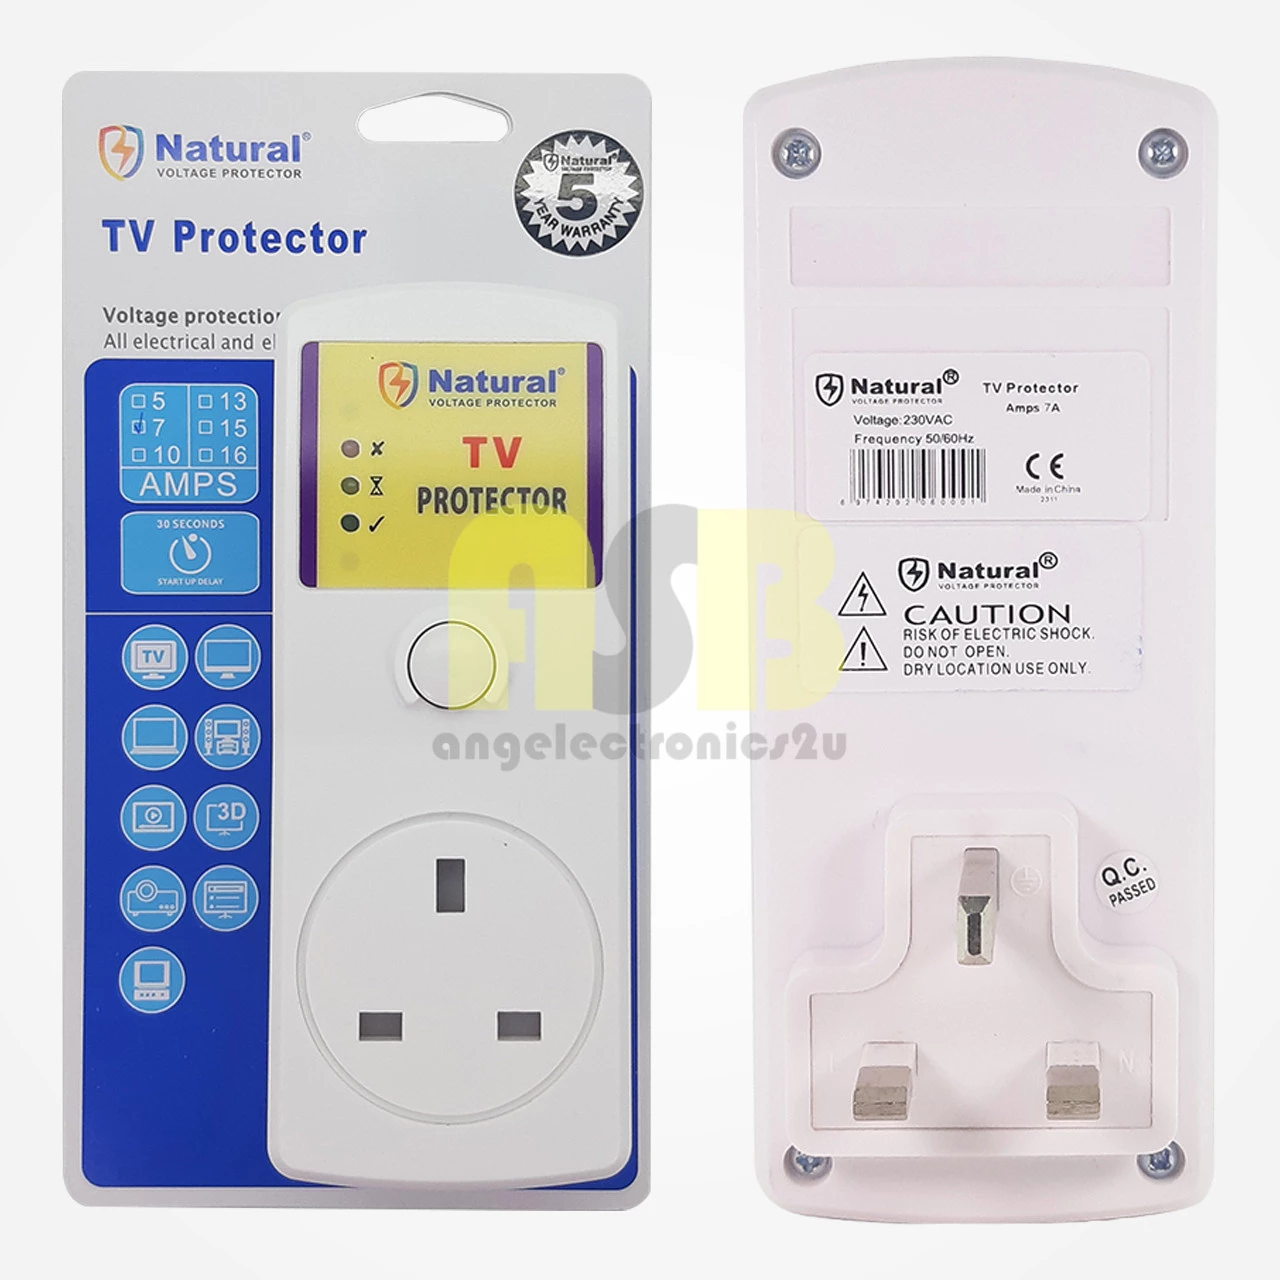 (1pc) Natural Voltage Protector / TV Protector / Lightning Protector / Surge Protector Adapter ( 7A ) 230V UK Plug